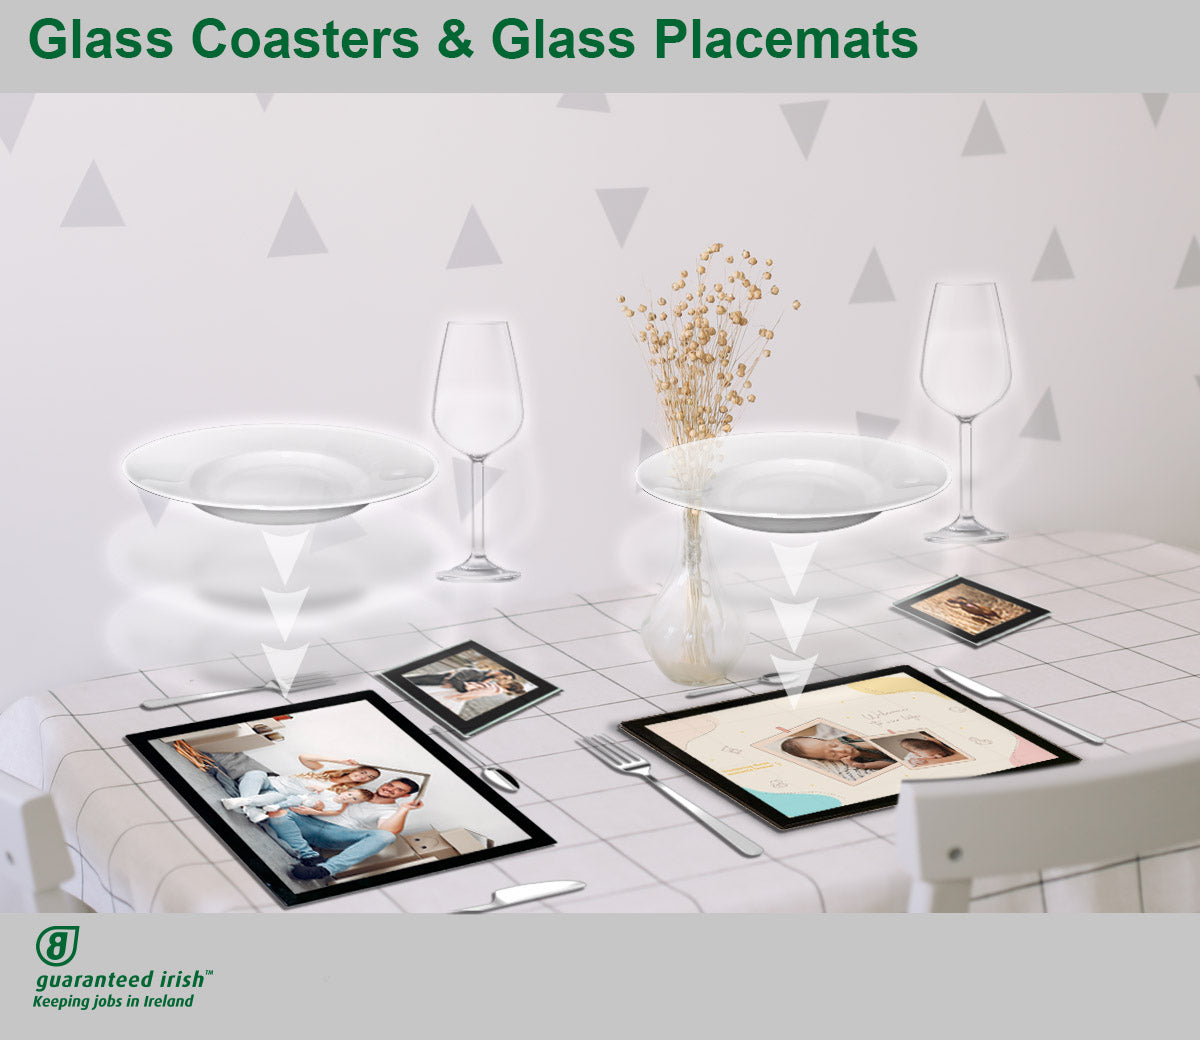 Glass Coasters & Glass Placemats